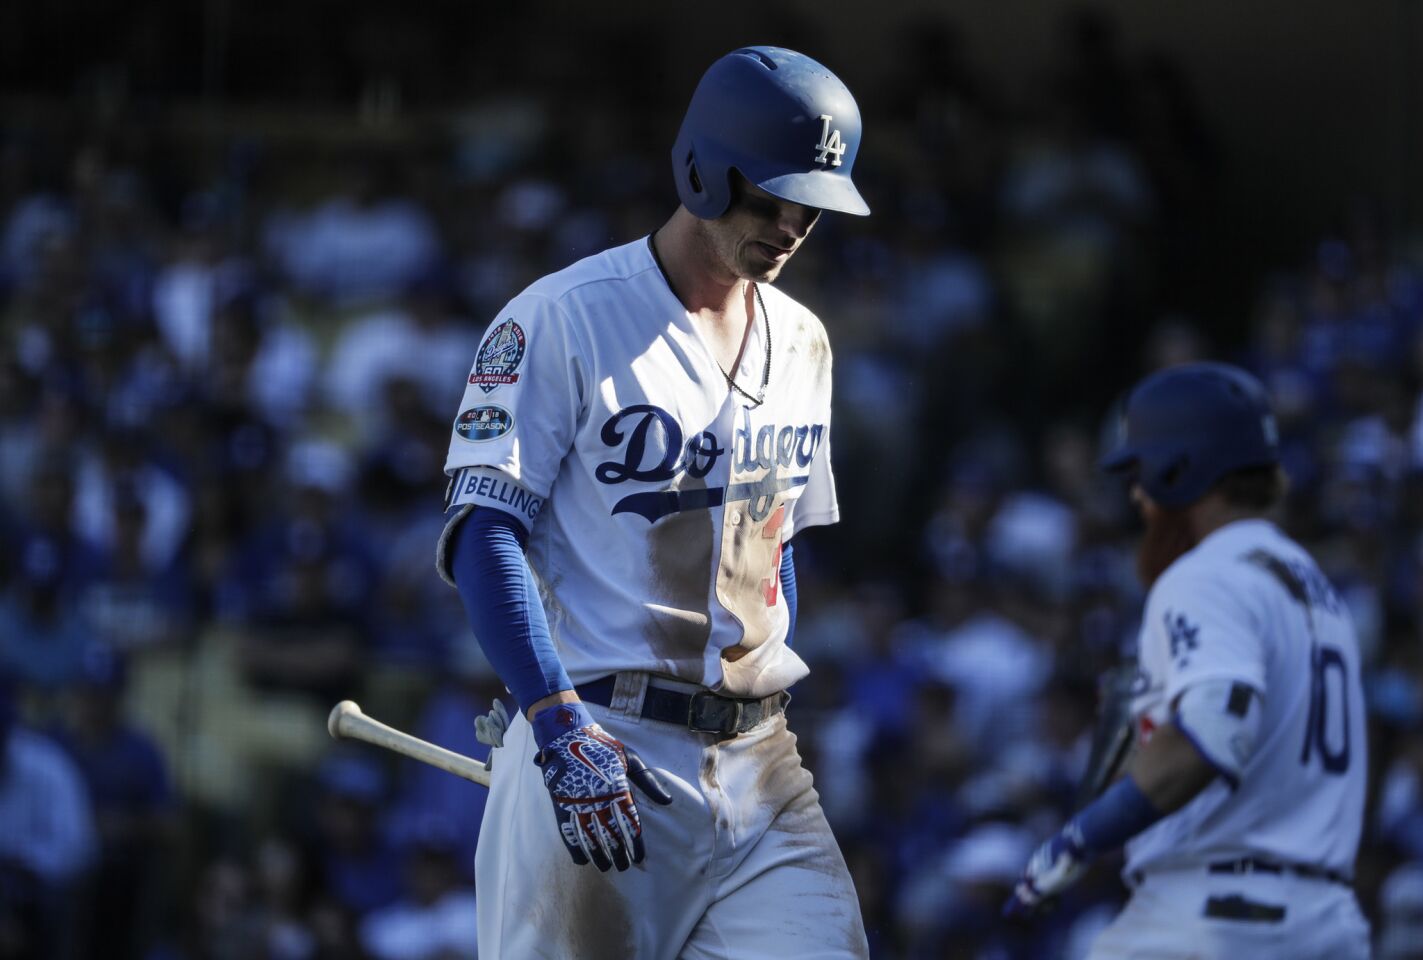 Cody Bellinger walks slowly back to the dugout after striking out in the third inning.